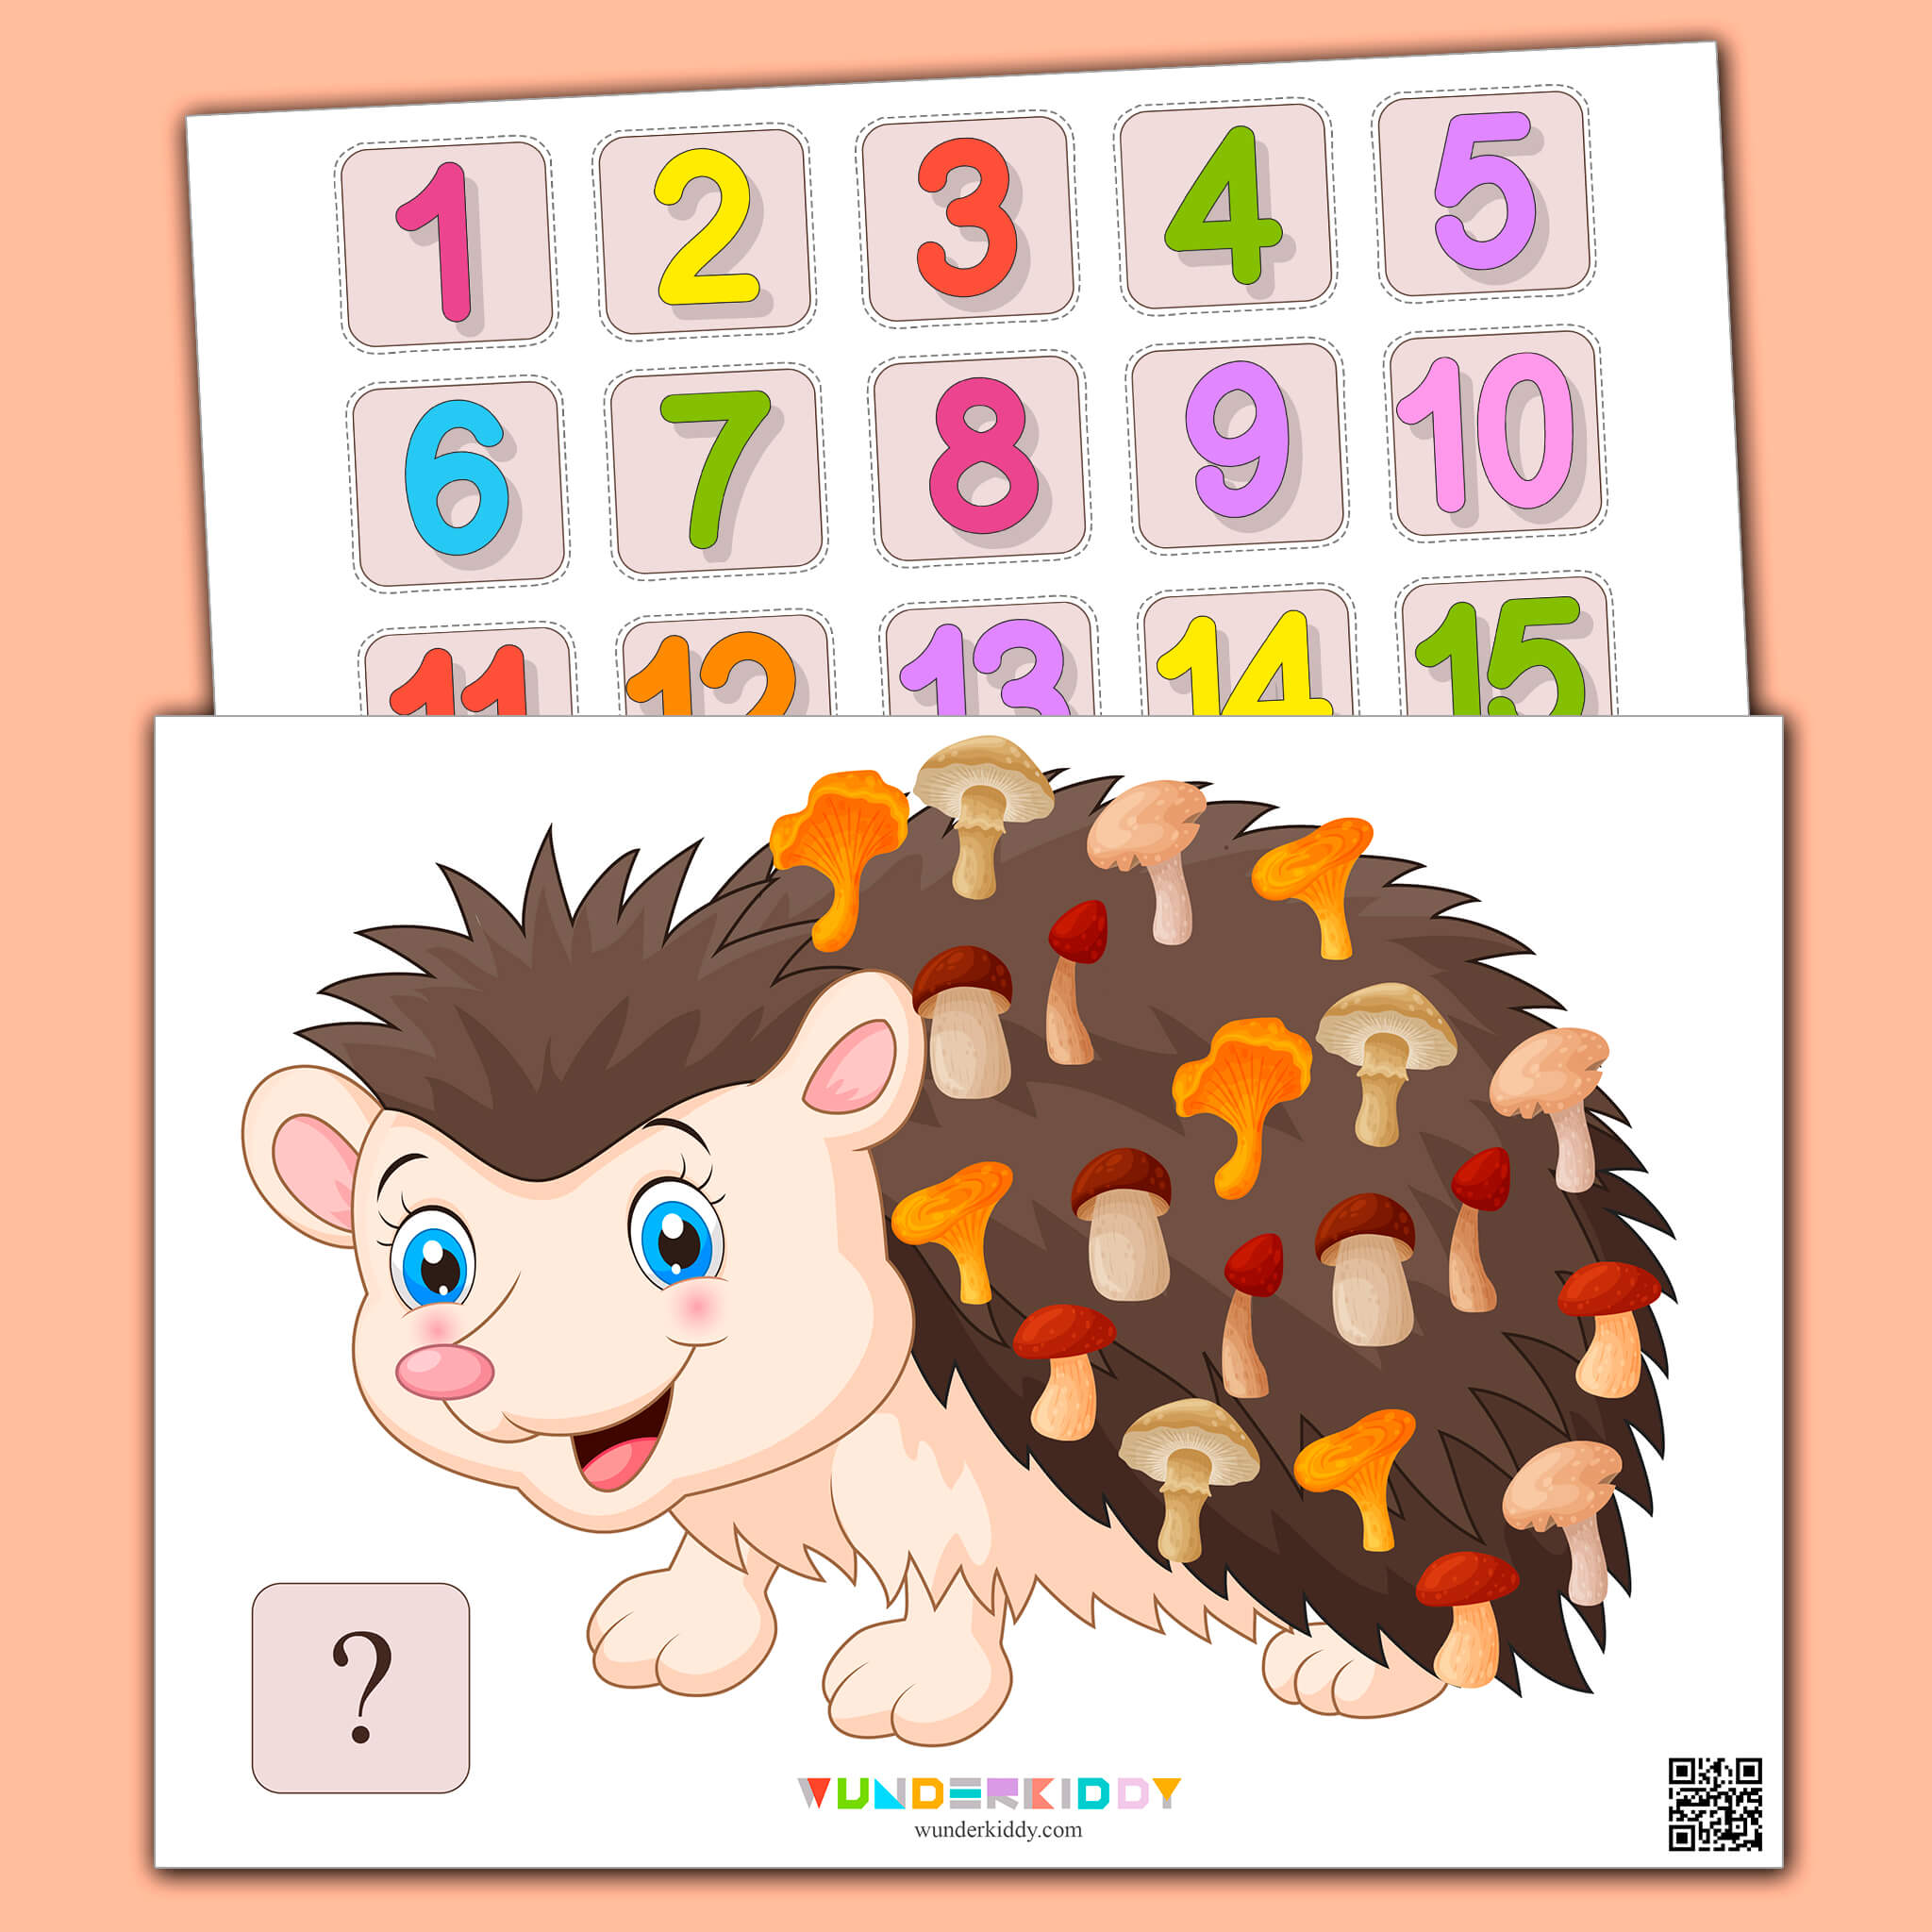 Worksheet Count to 20 with Hedgehog and Mushrooms